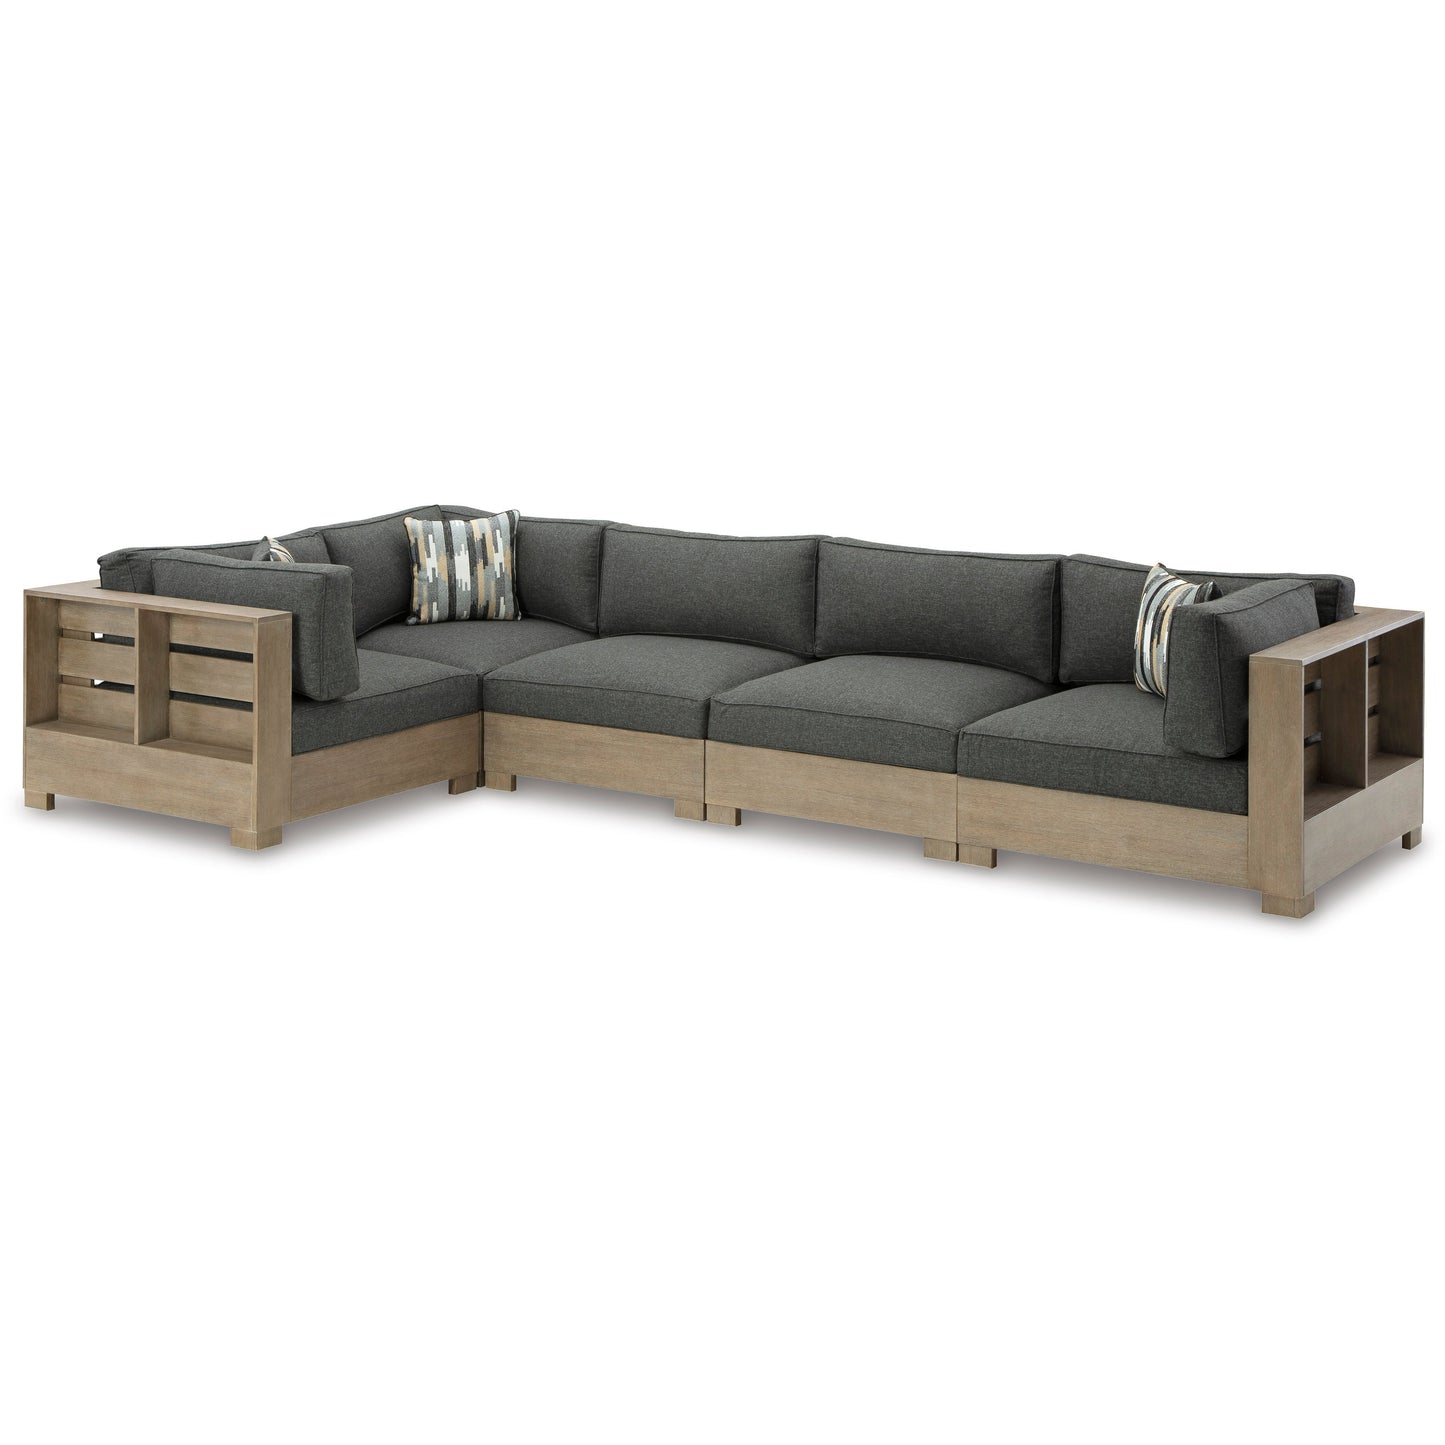 CITRINE PARK 5-PC OUTDOOR SECTIONAL